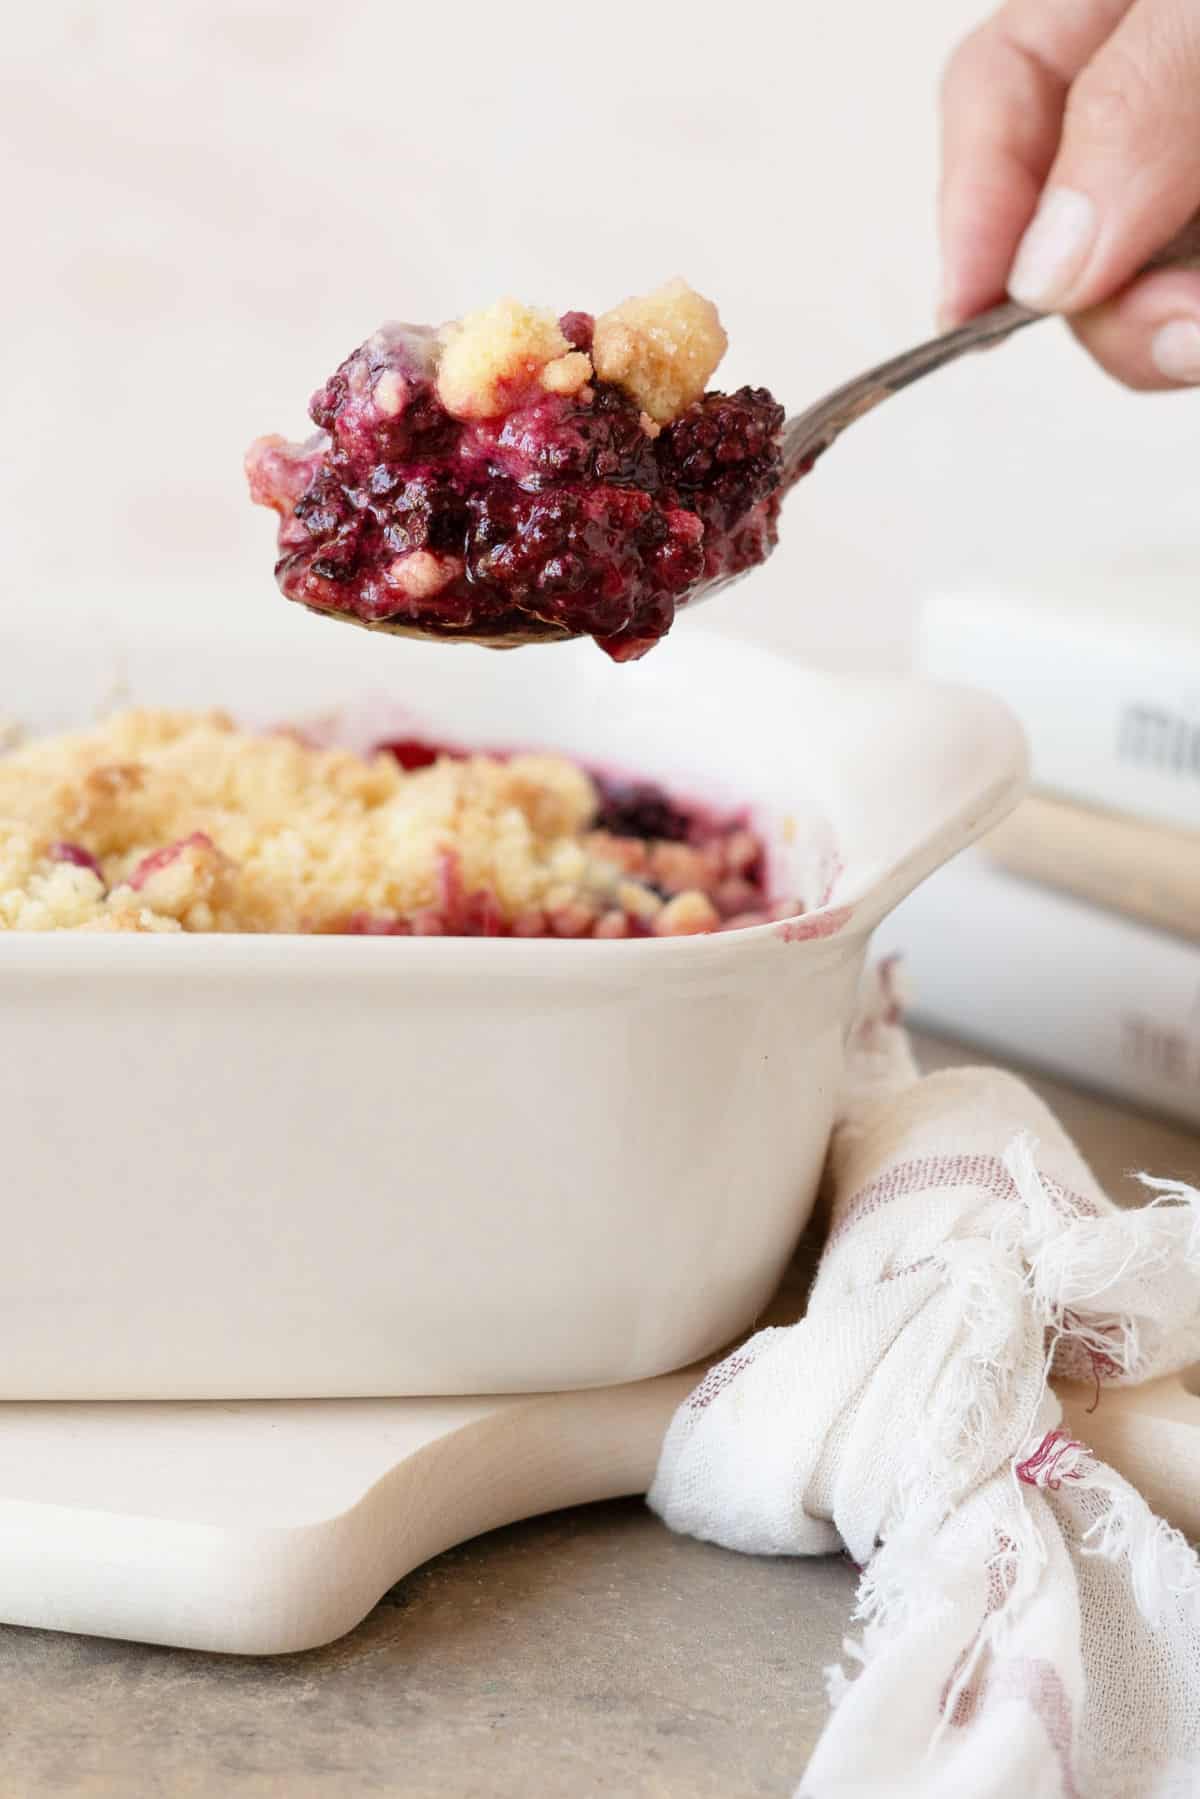 Hand lifting blackberry dump cake with a spoon. White dish on a board, a kitchen towel, peach colored background. 